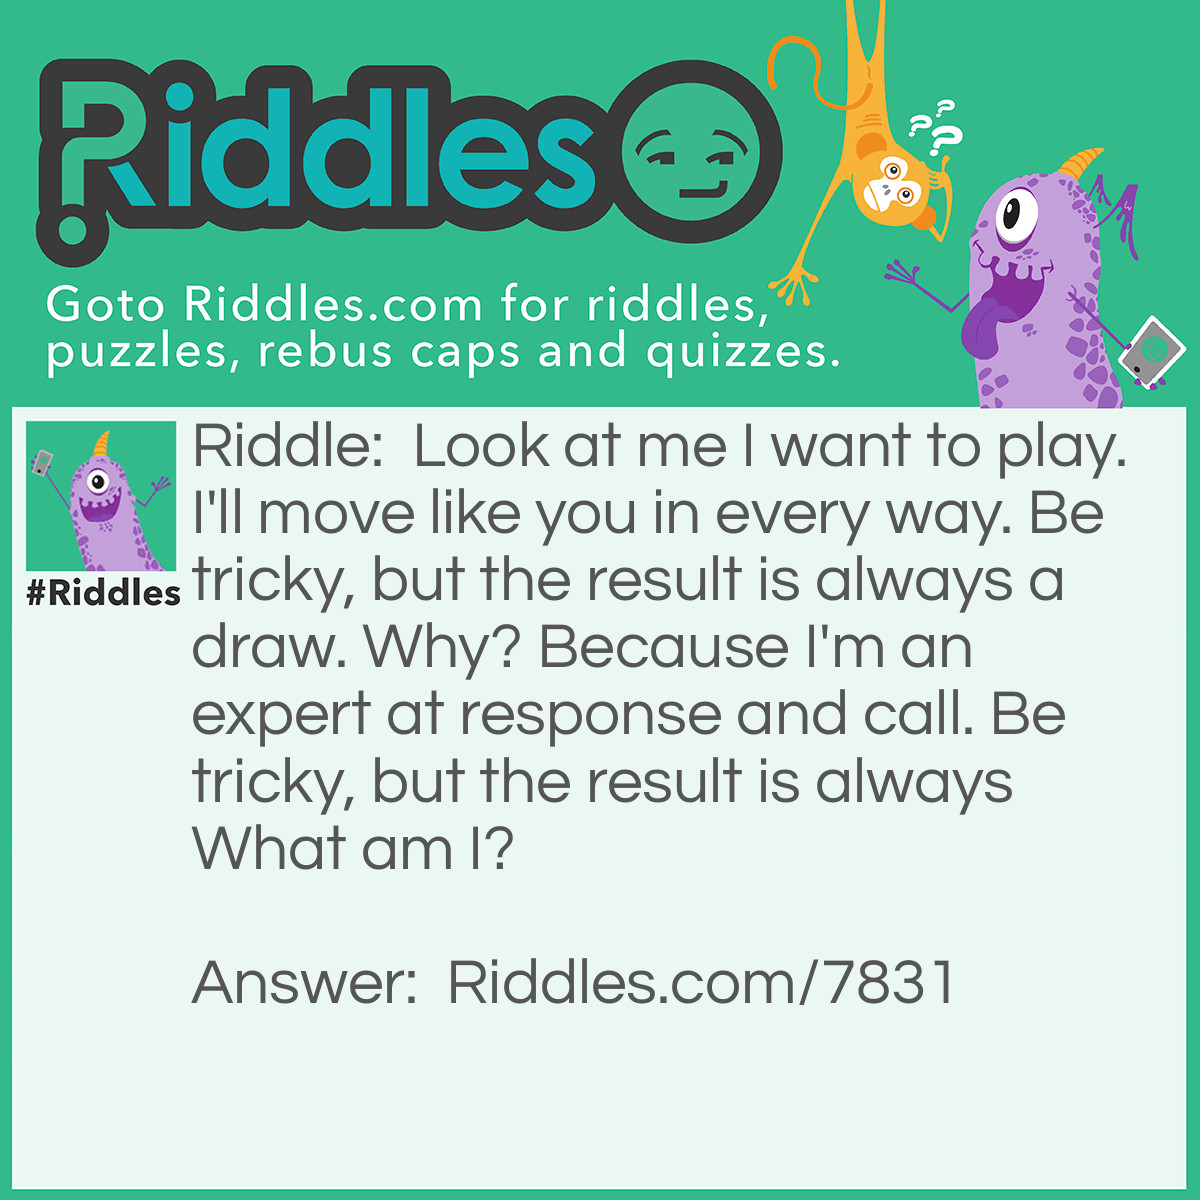 Riddle: Look at me I want to play. I'll move like you in every way. Be tricky, but the result is always a draw. Why? Because I'm an expert at response and call. Be <a href="/difficult-riddles">tricky</a>, but the result is always What am I? Answer: Your Reflection!